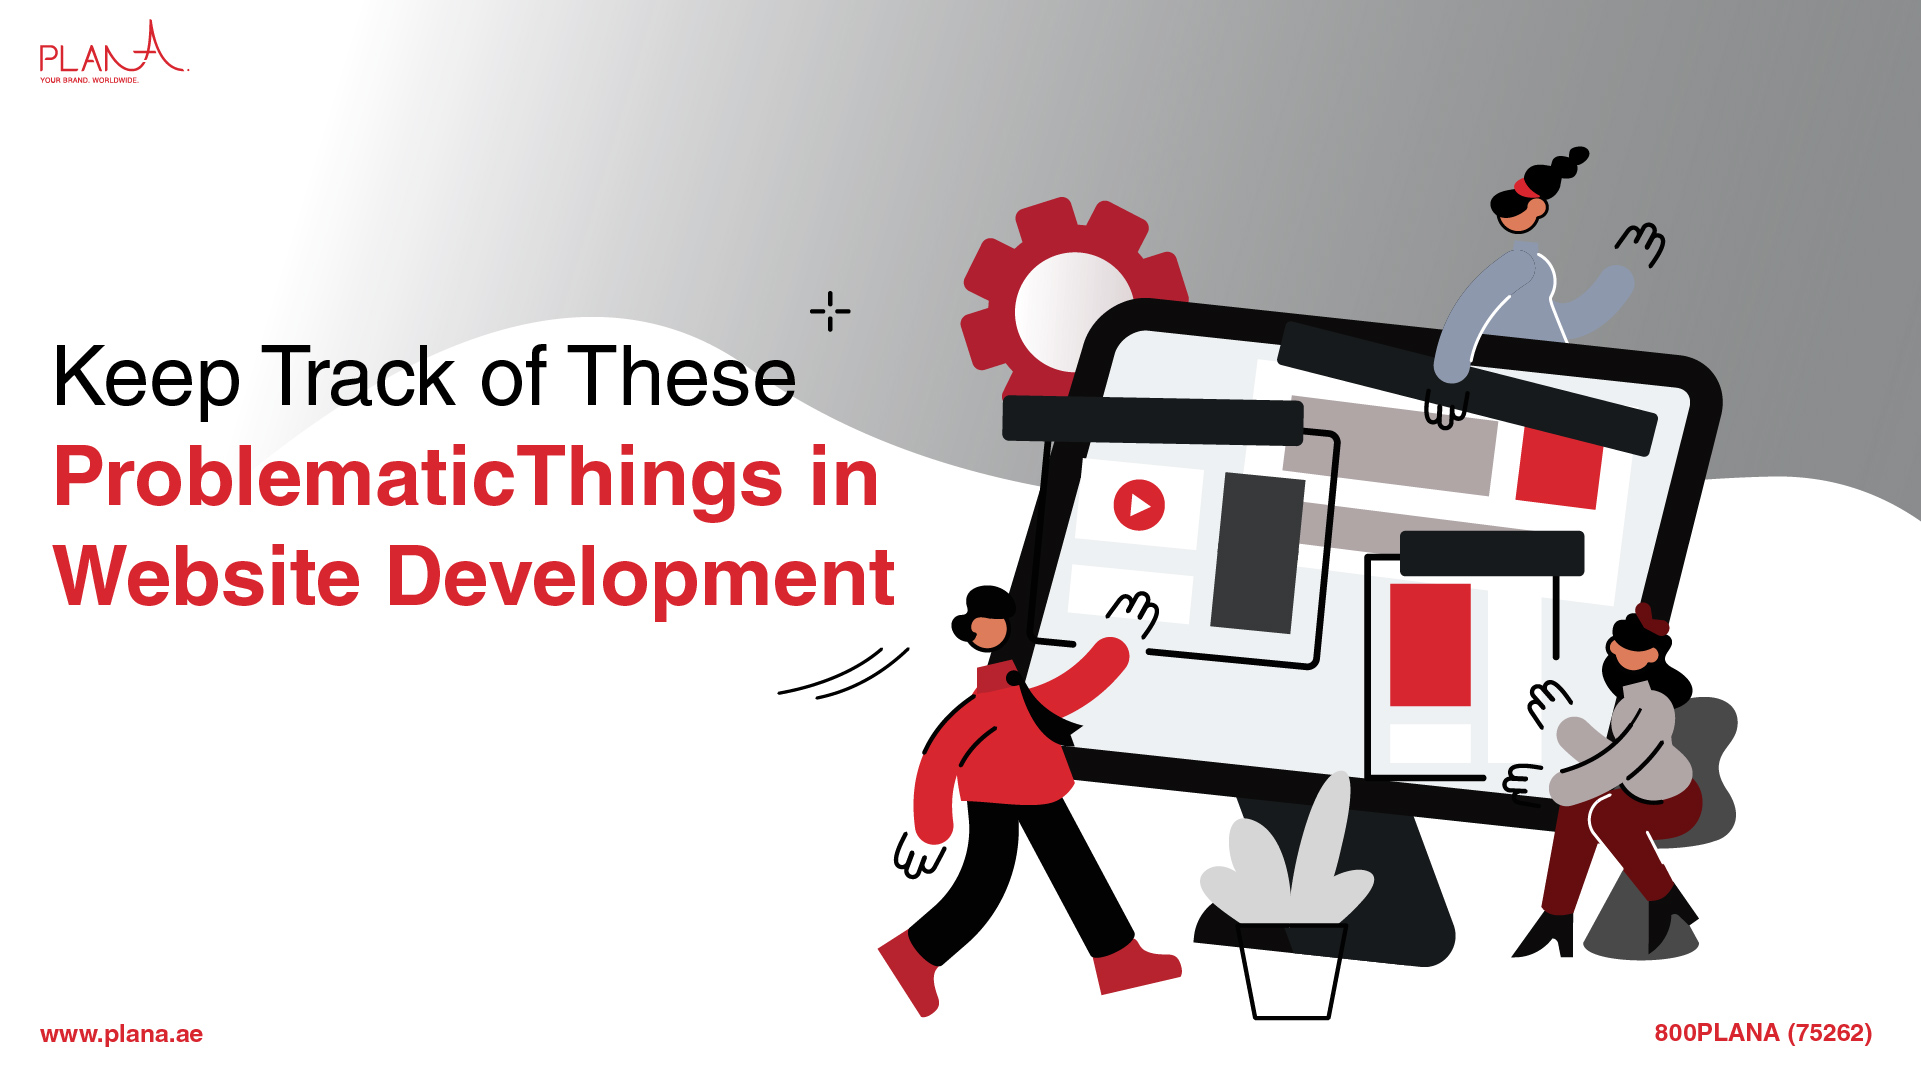 Keep Track of These Problematic Things in Website Development